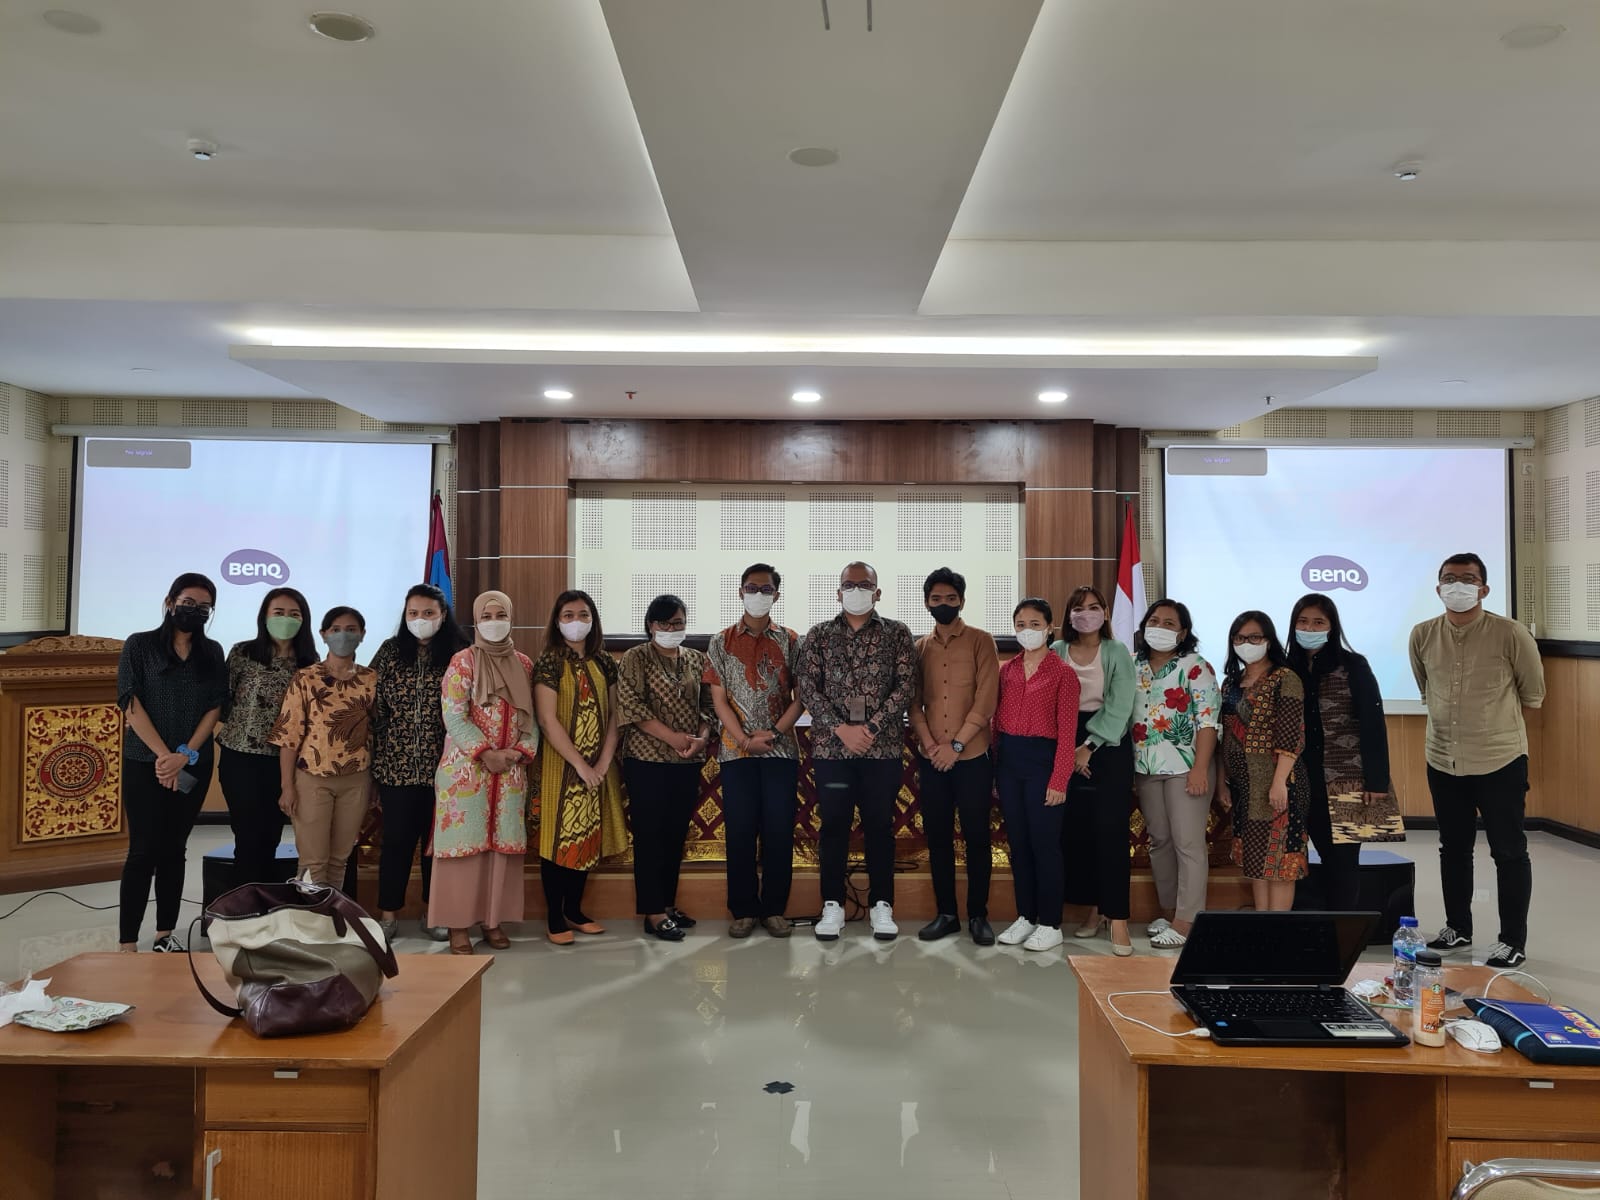 SCIENTIFIC JOURNAL MANAGEMENT WORKSHOP WITH OPEN JOURNAL SYSTEM IN THE FACULTY OF SOCIAL AND POLITICAL SCIENCES, UDAYANA UNIVERSITY